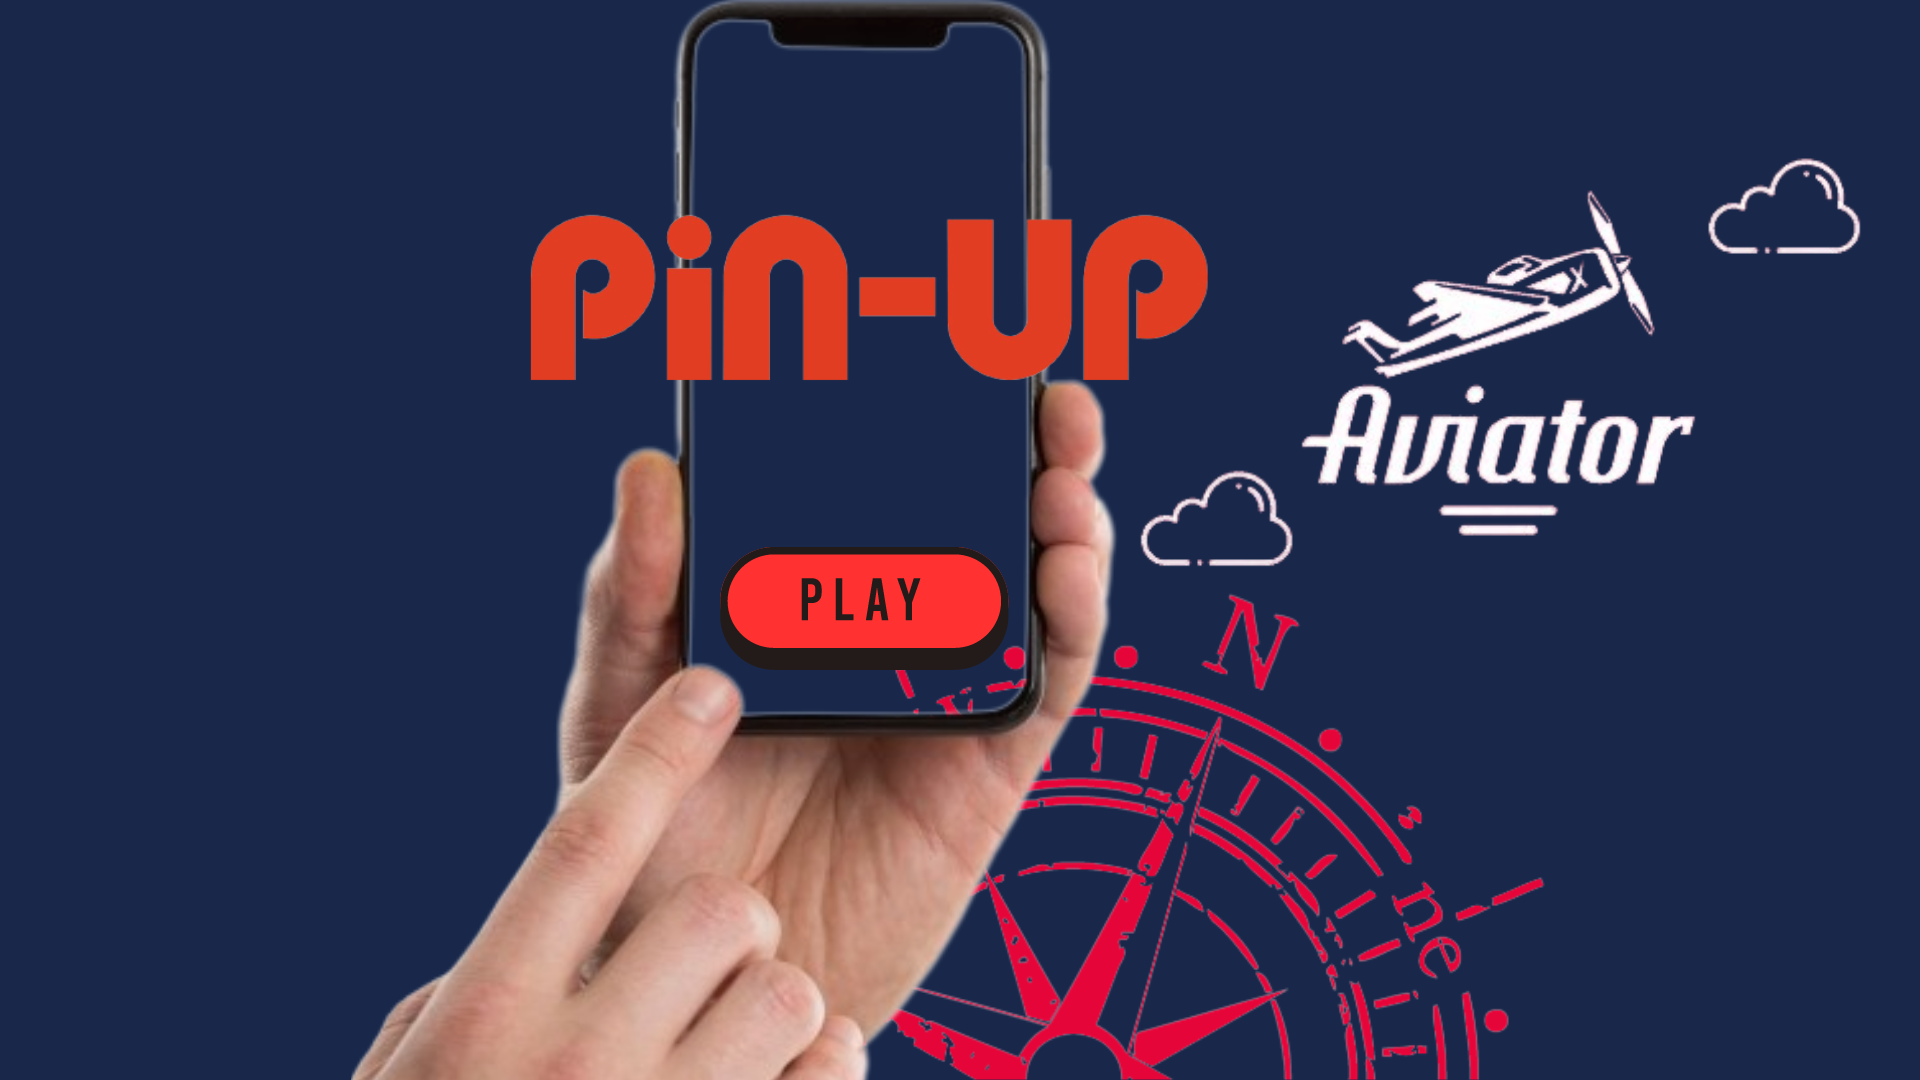 Logos of the Aviator game and Pin Up casino, and a hand holding smartphone background